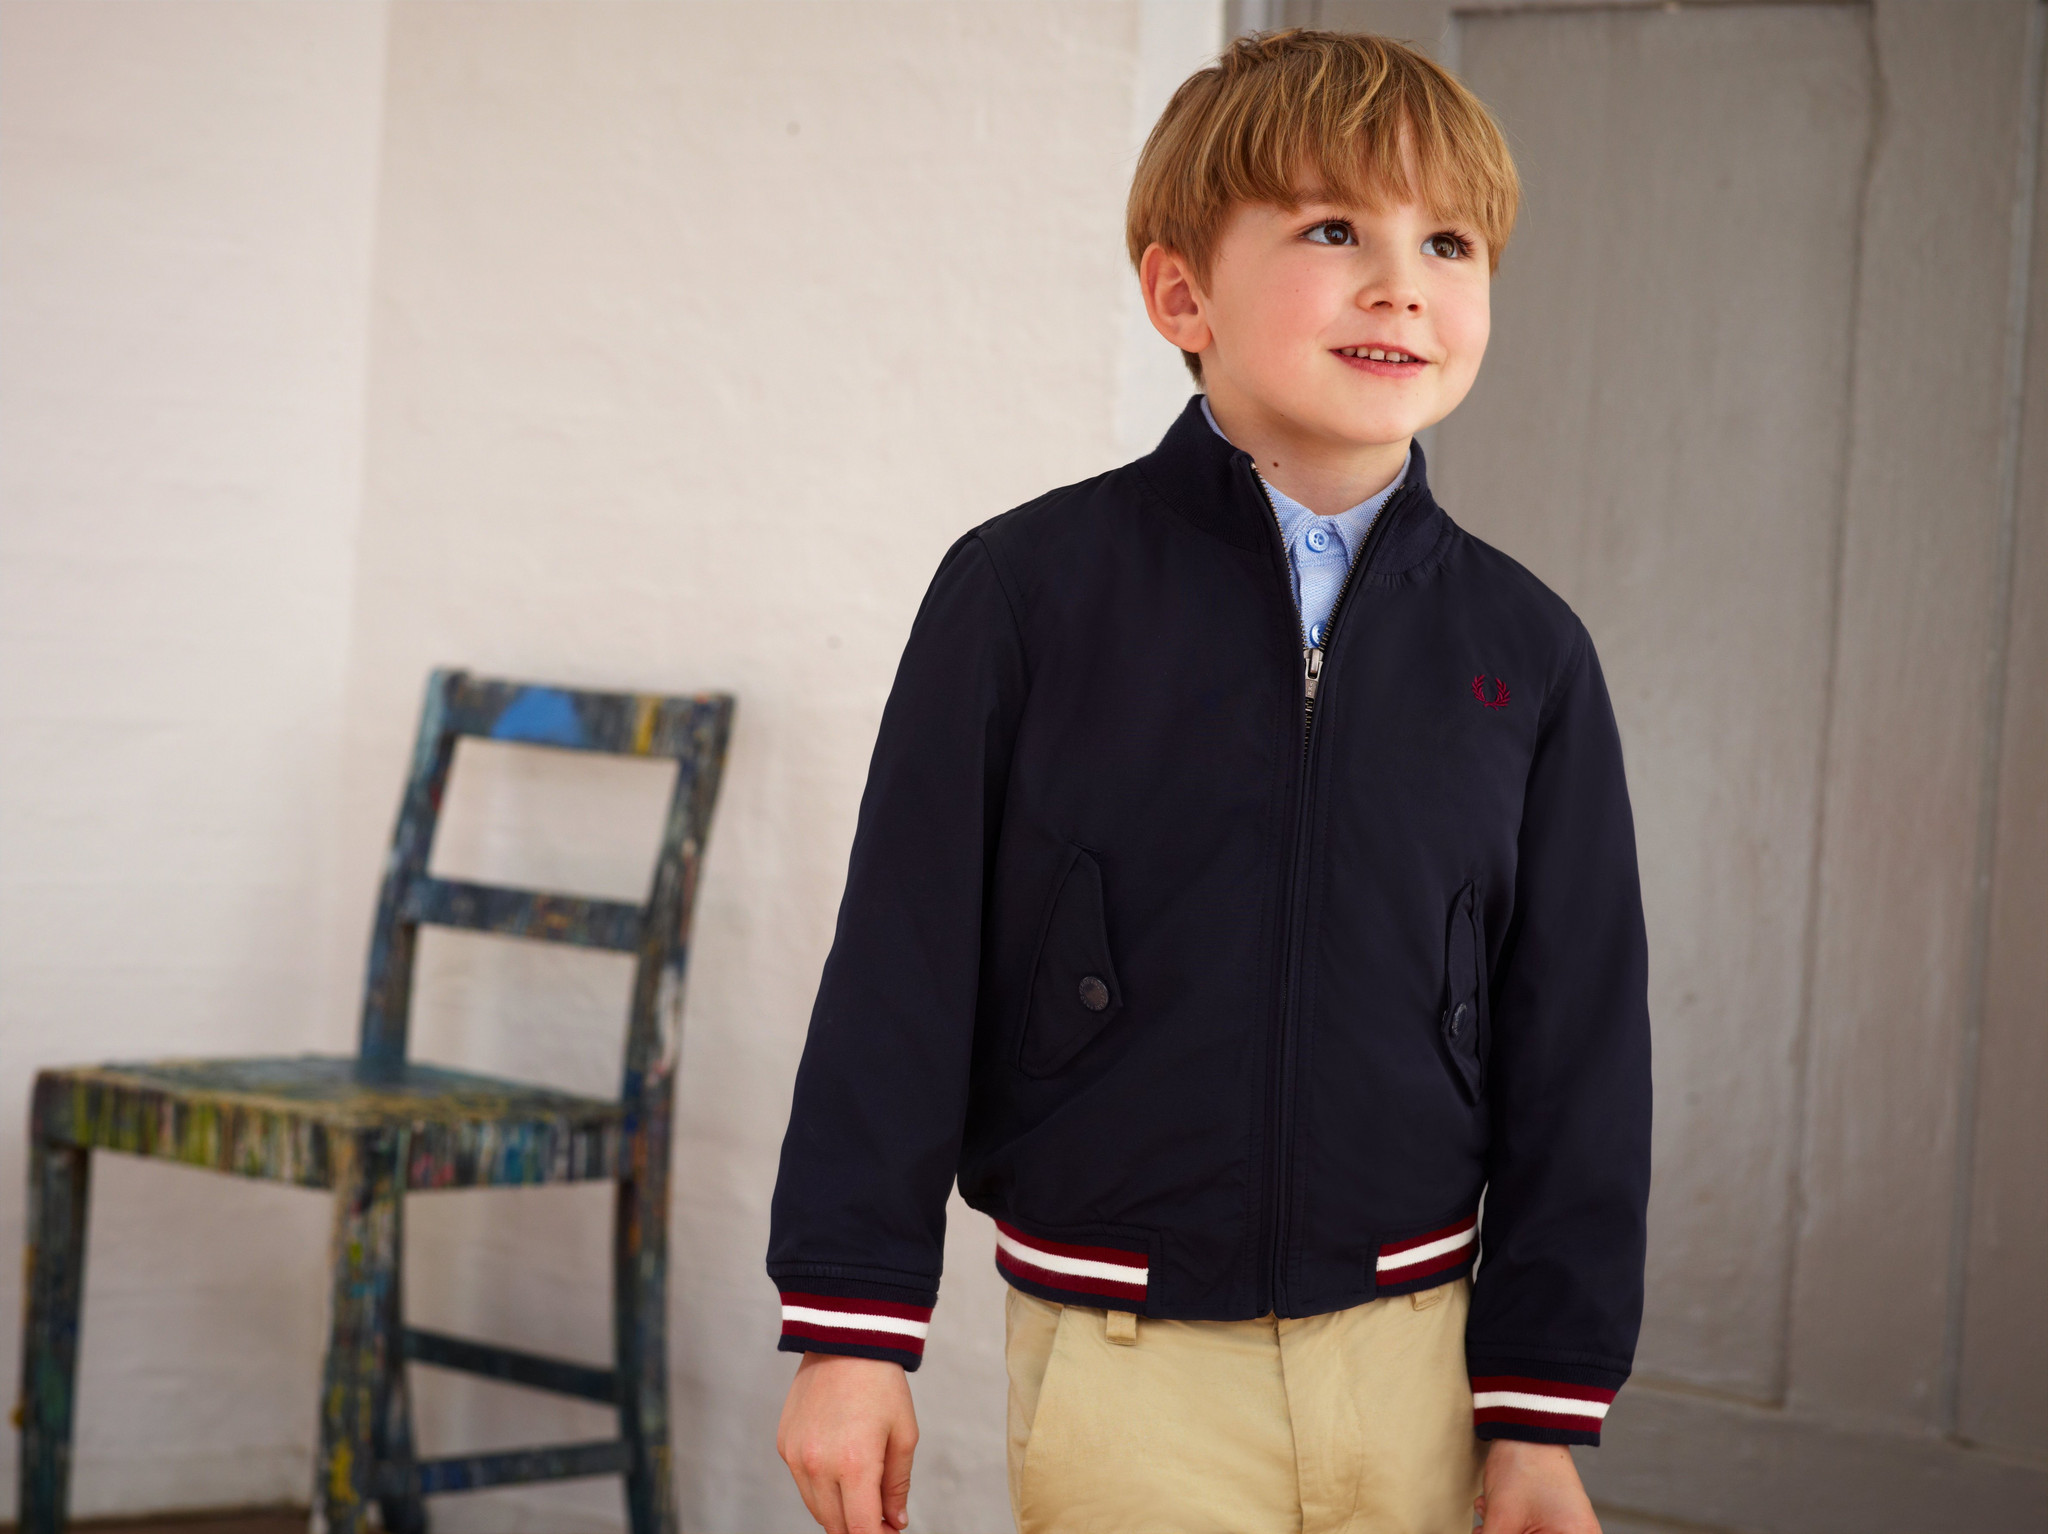 S9_FRED PERRY Kids FP_AD_AW12_076LR.jpg